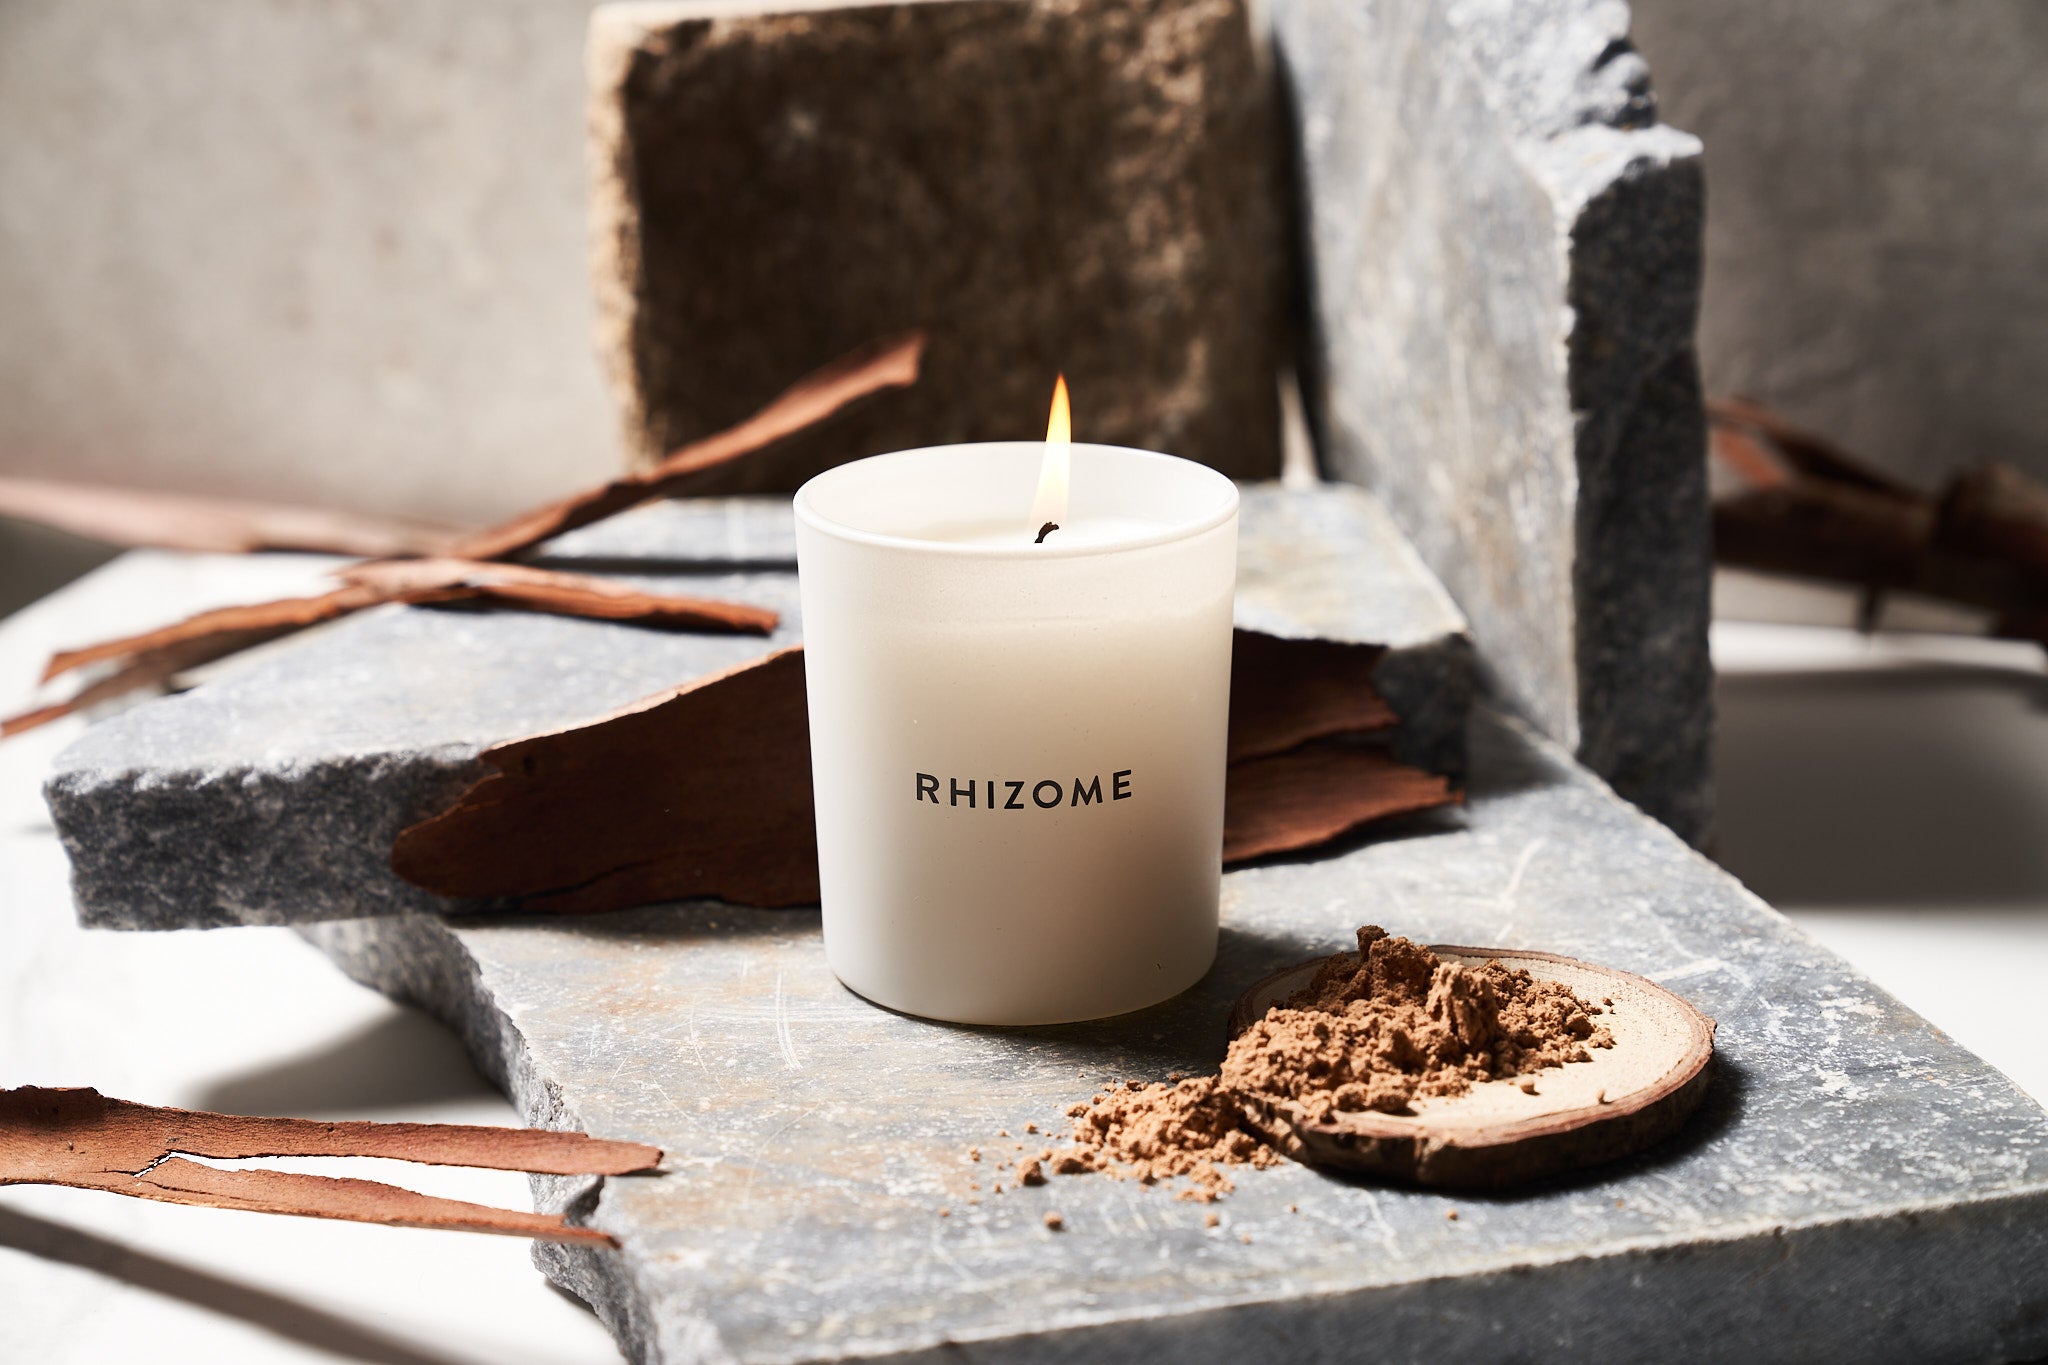 Rhizome 02 Scented Candle, 150g